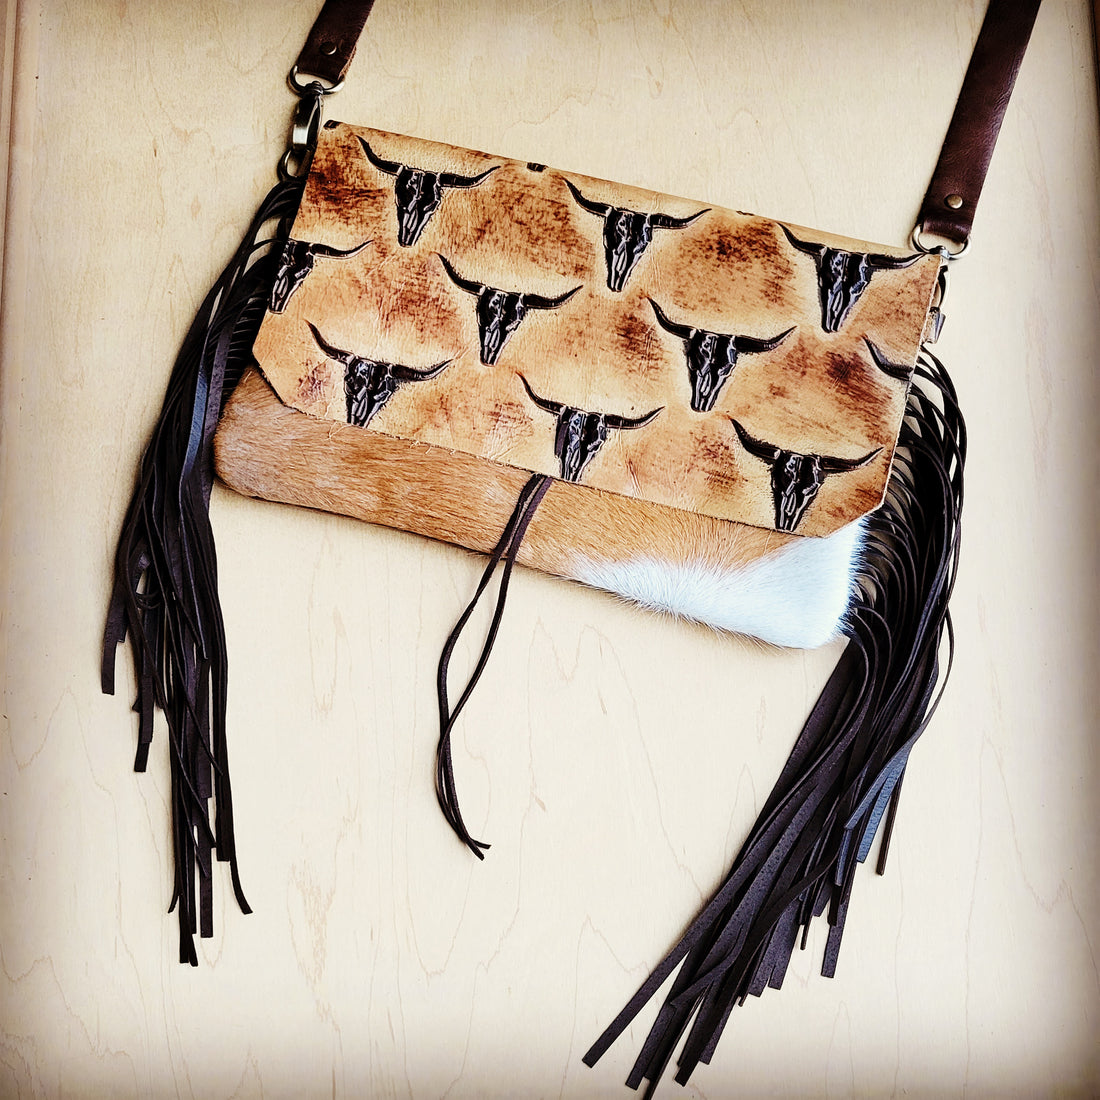 The Unforgettable Blend of Fashion: Boho Western Jewelry and Leather Handbags